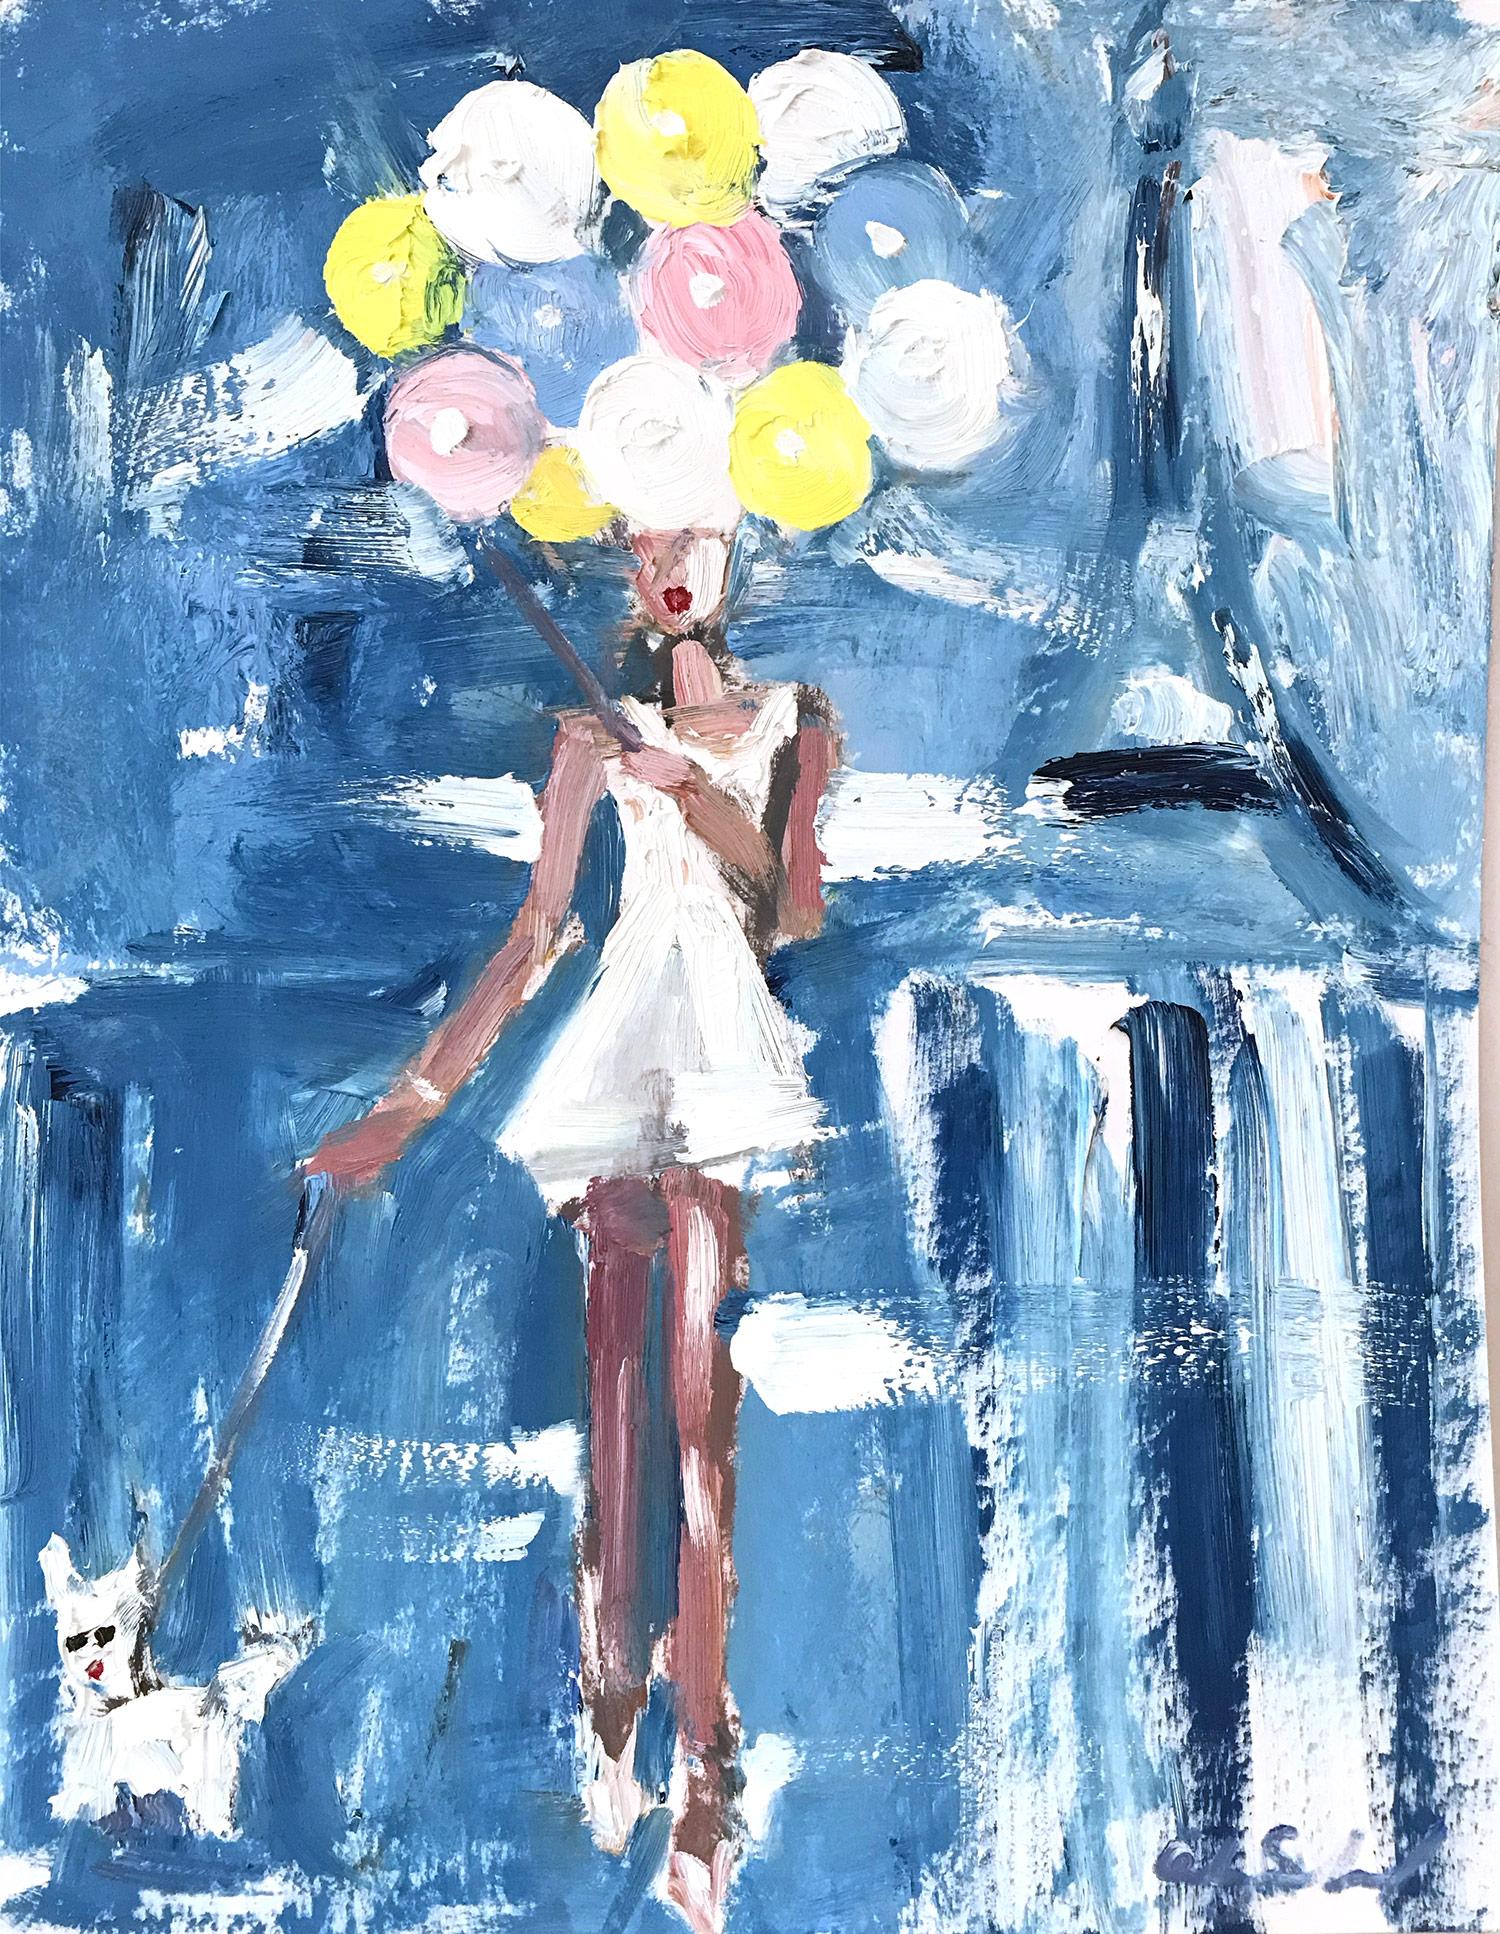 "Girl with Balloons - Stacy" Figure in Paris Haute Couture Oil Painting with Dog